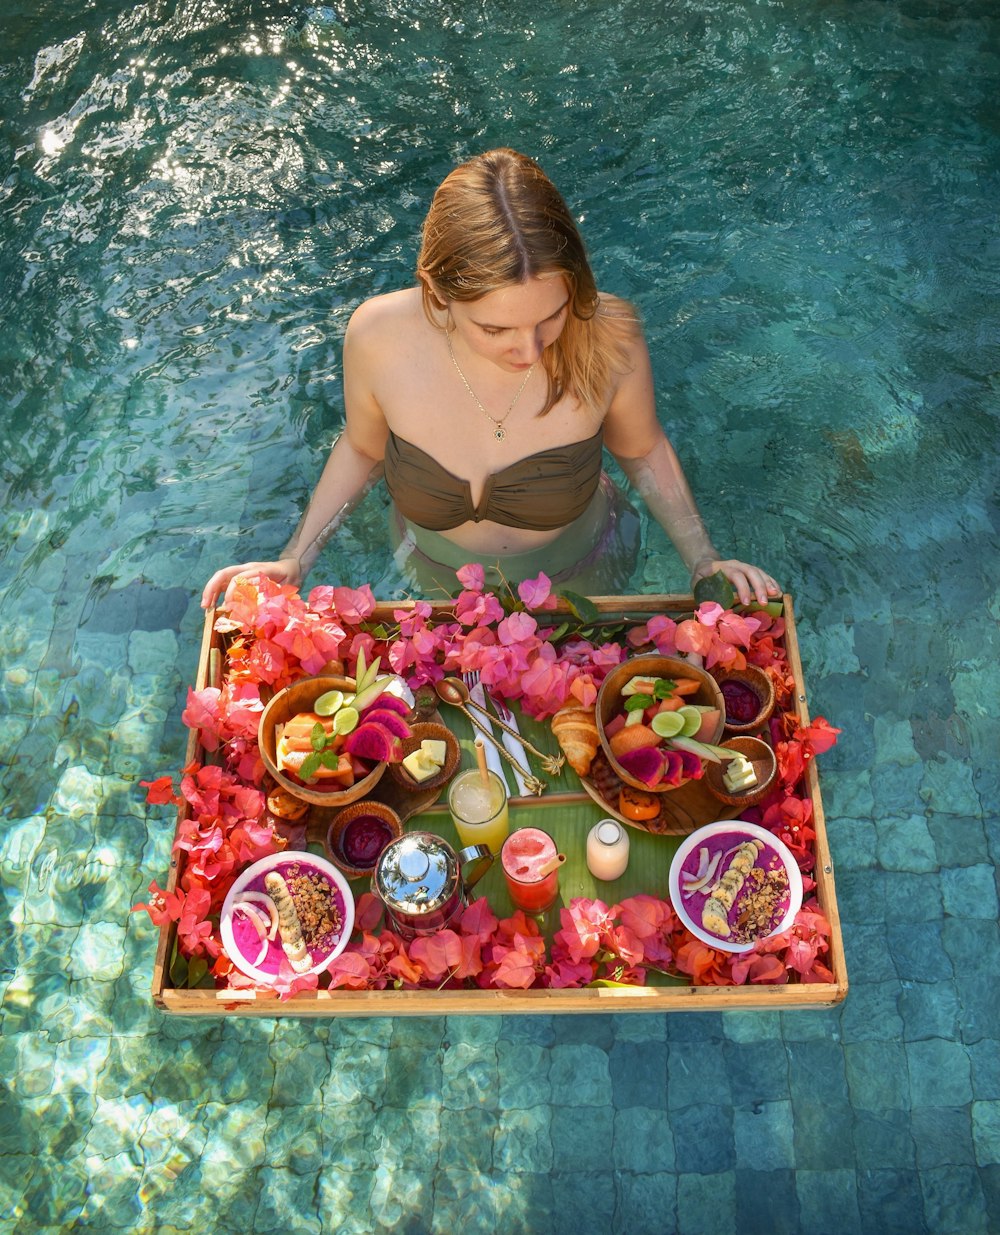 tray of fruits on pool